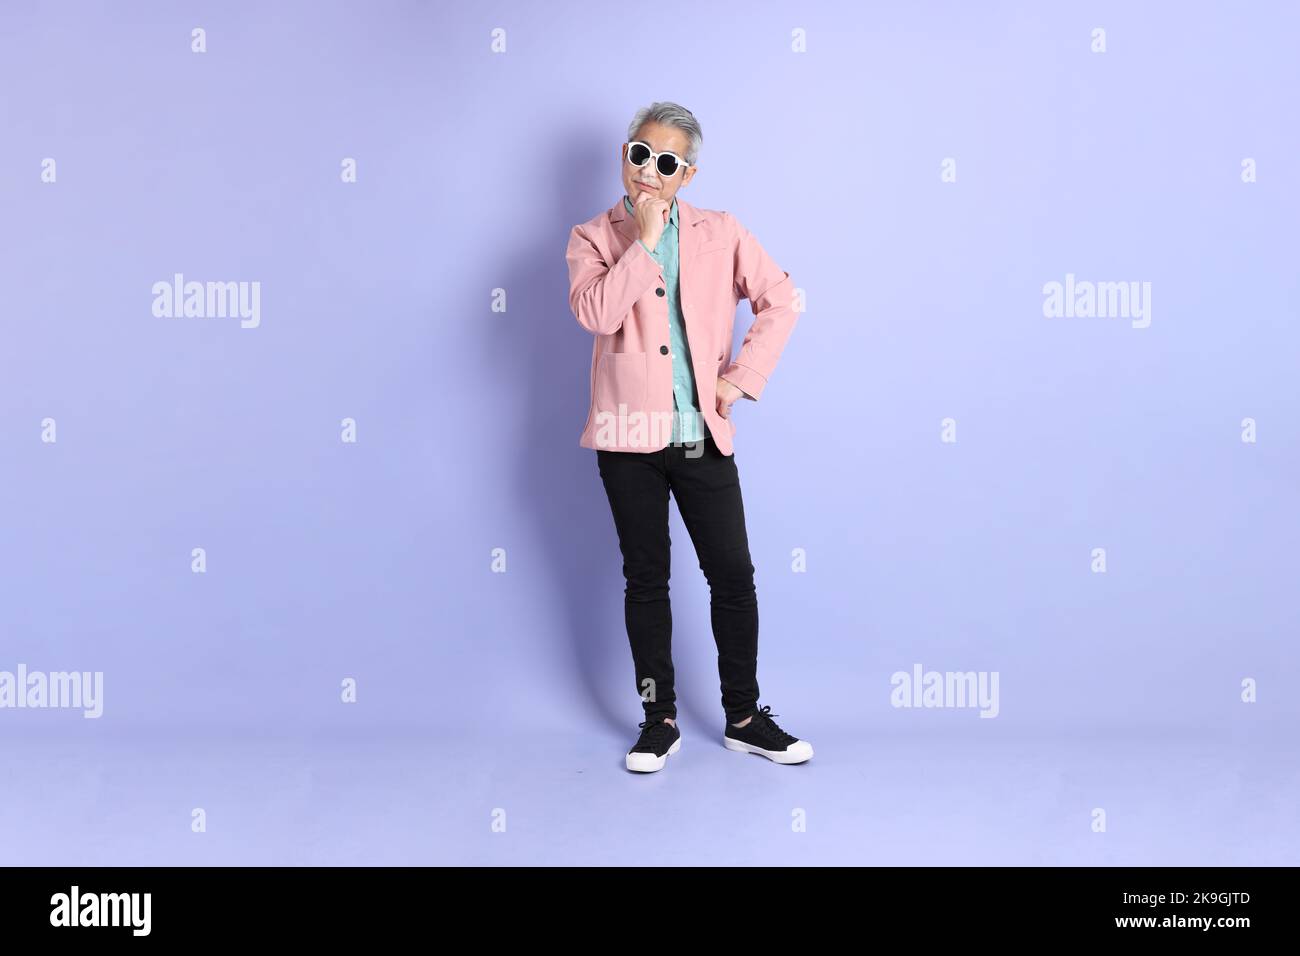 The 40s adult Asian man stnading on the purple background with smart casual clothes. Stock Photo